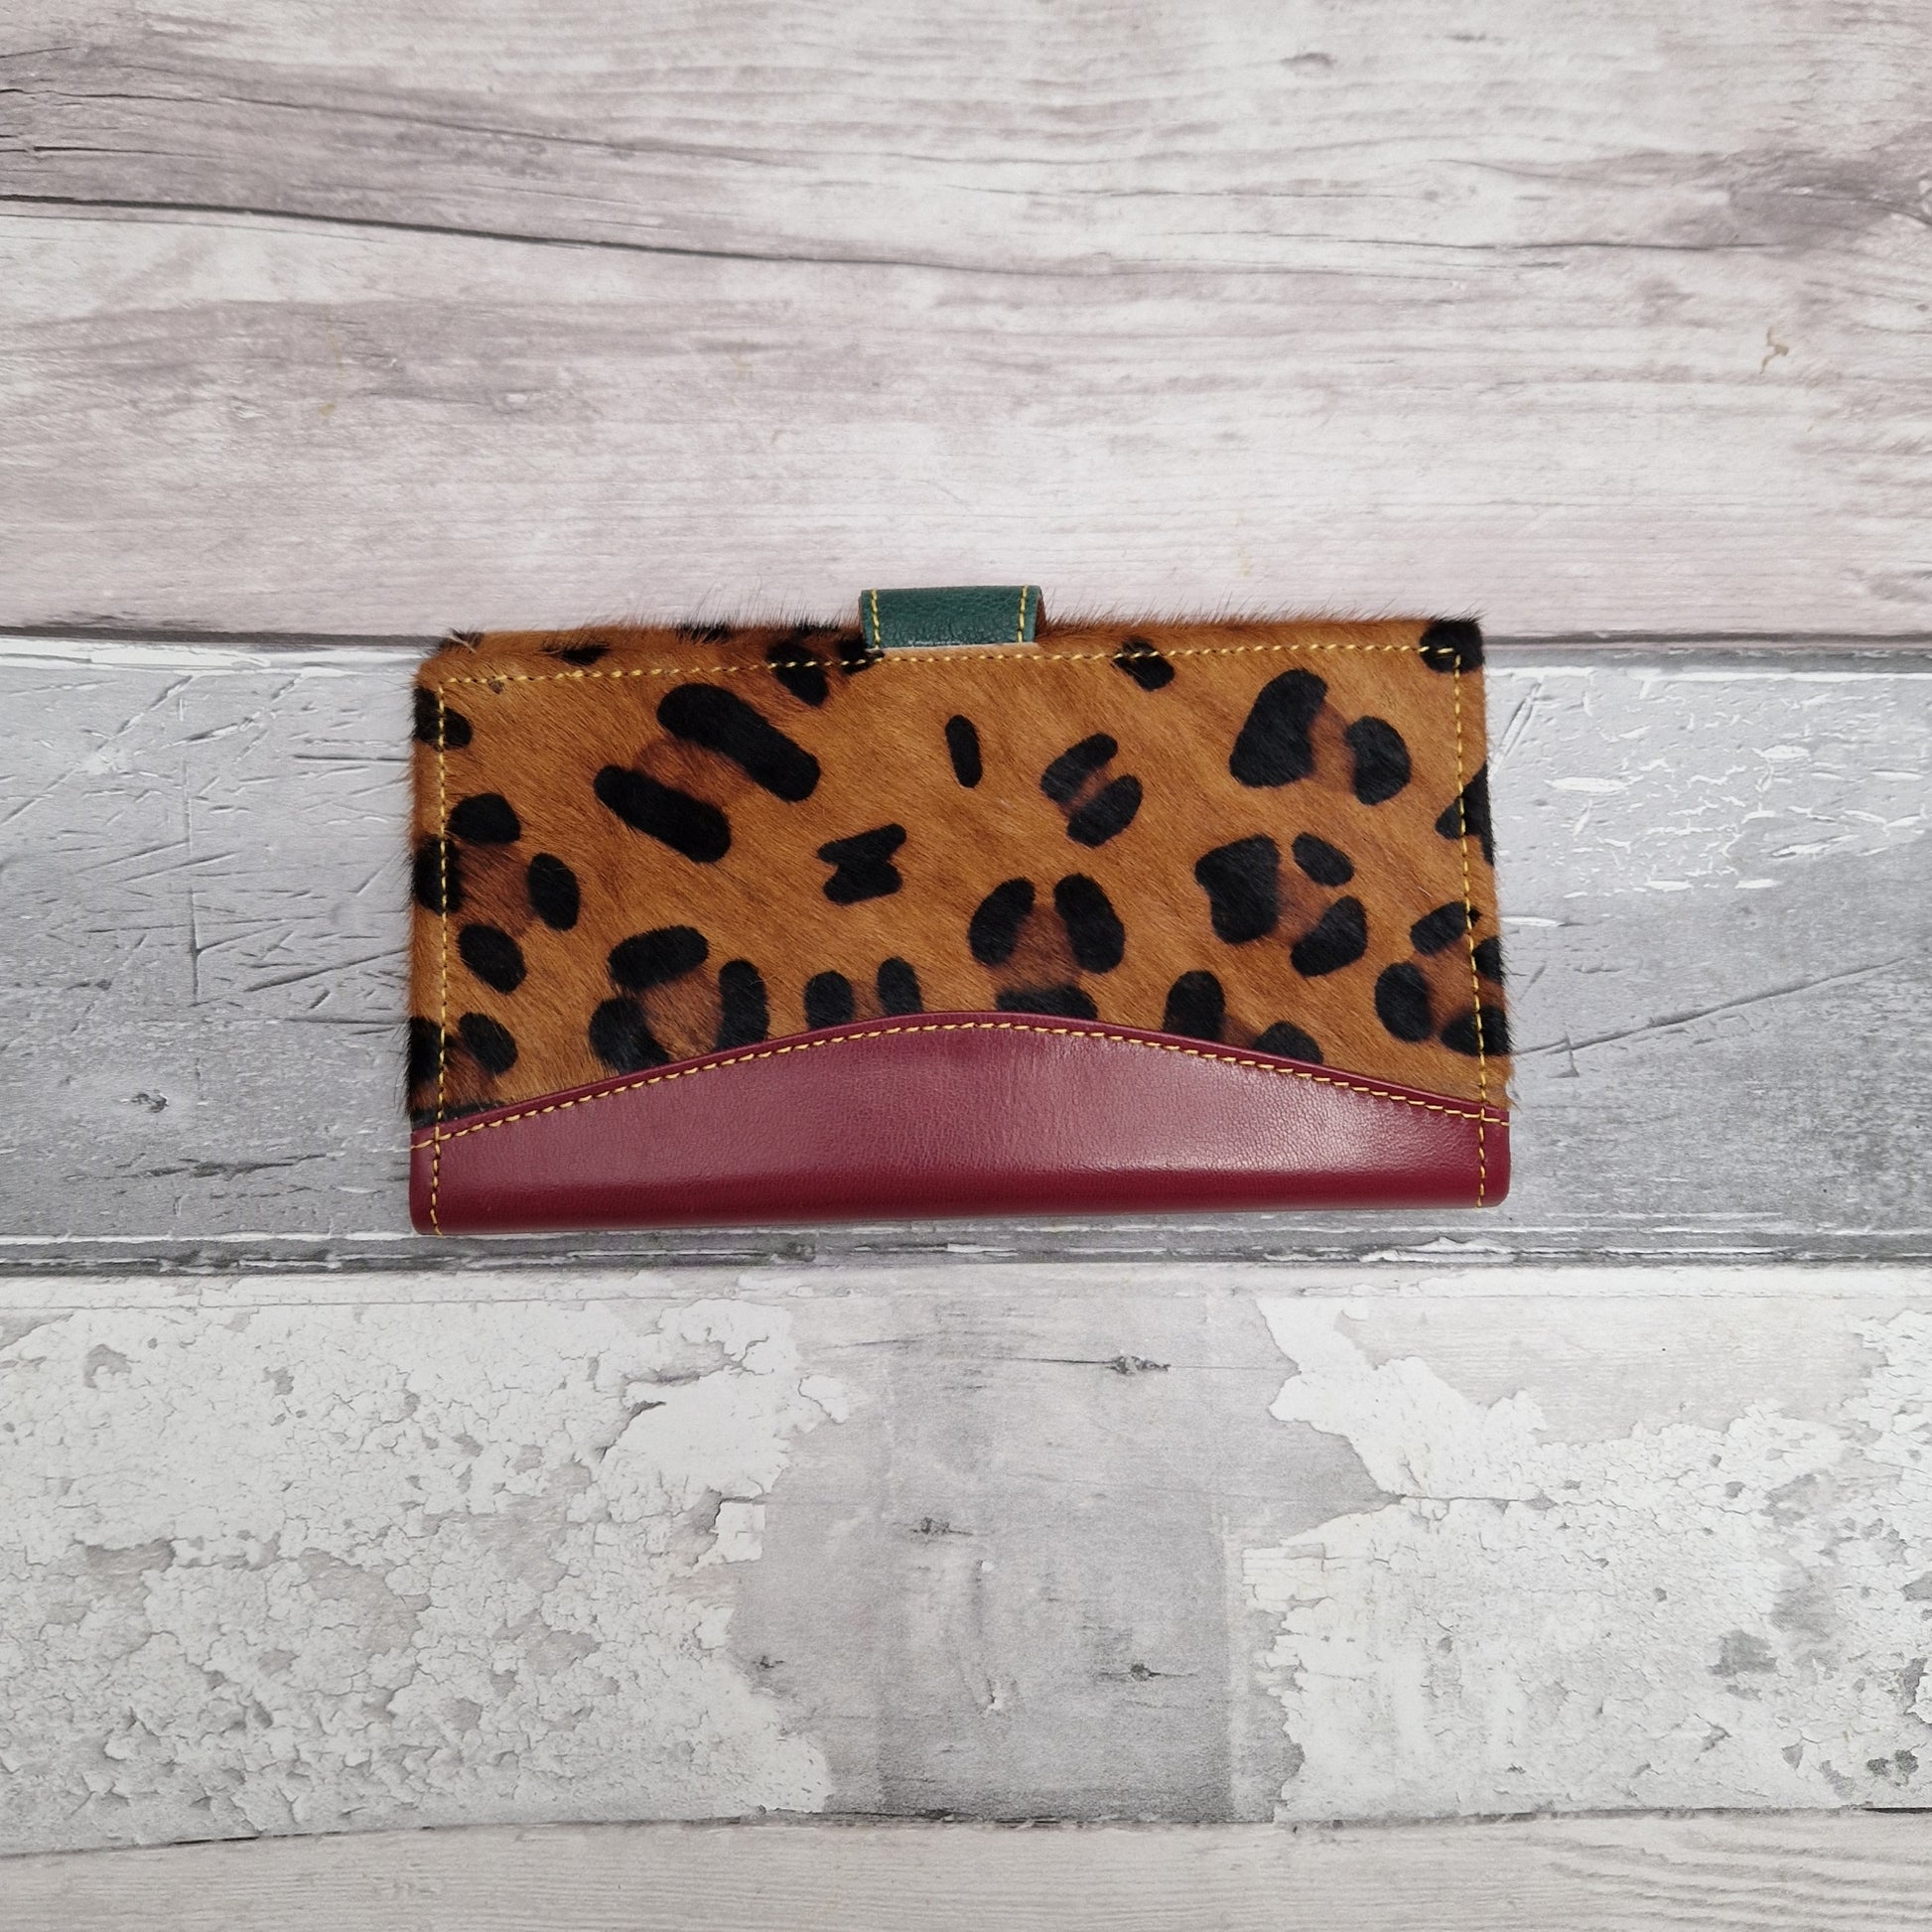 Purse made from leather off cuts featuring textured panels in a Leopard print.